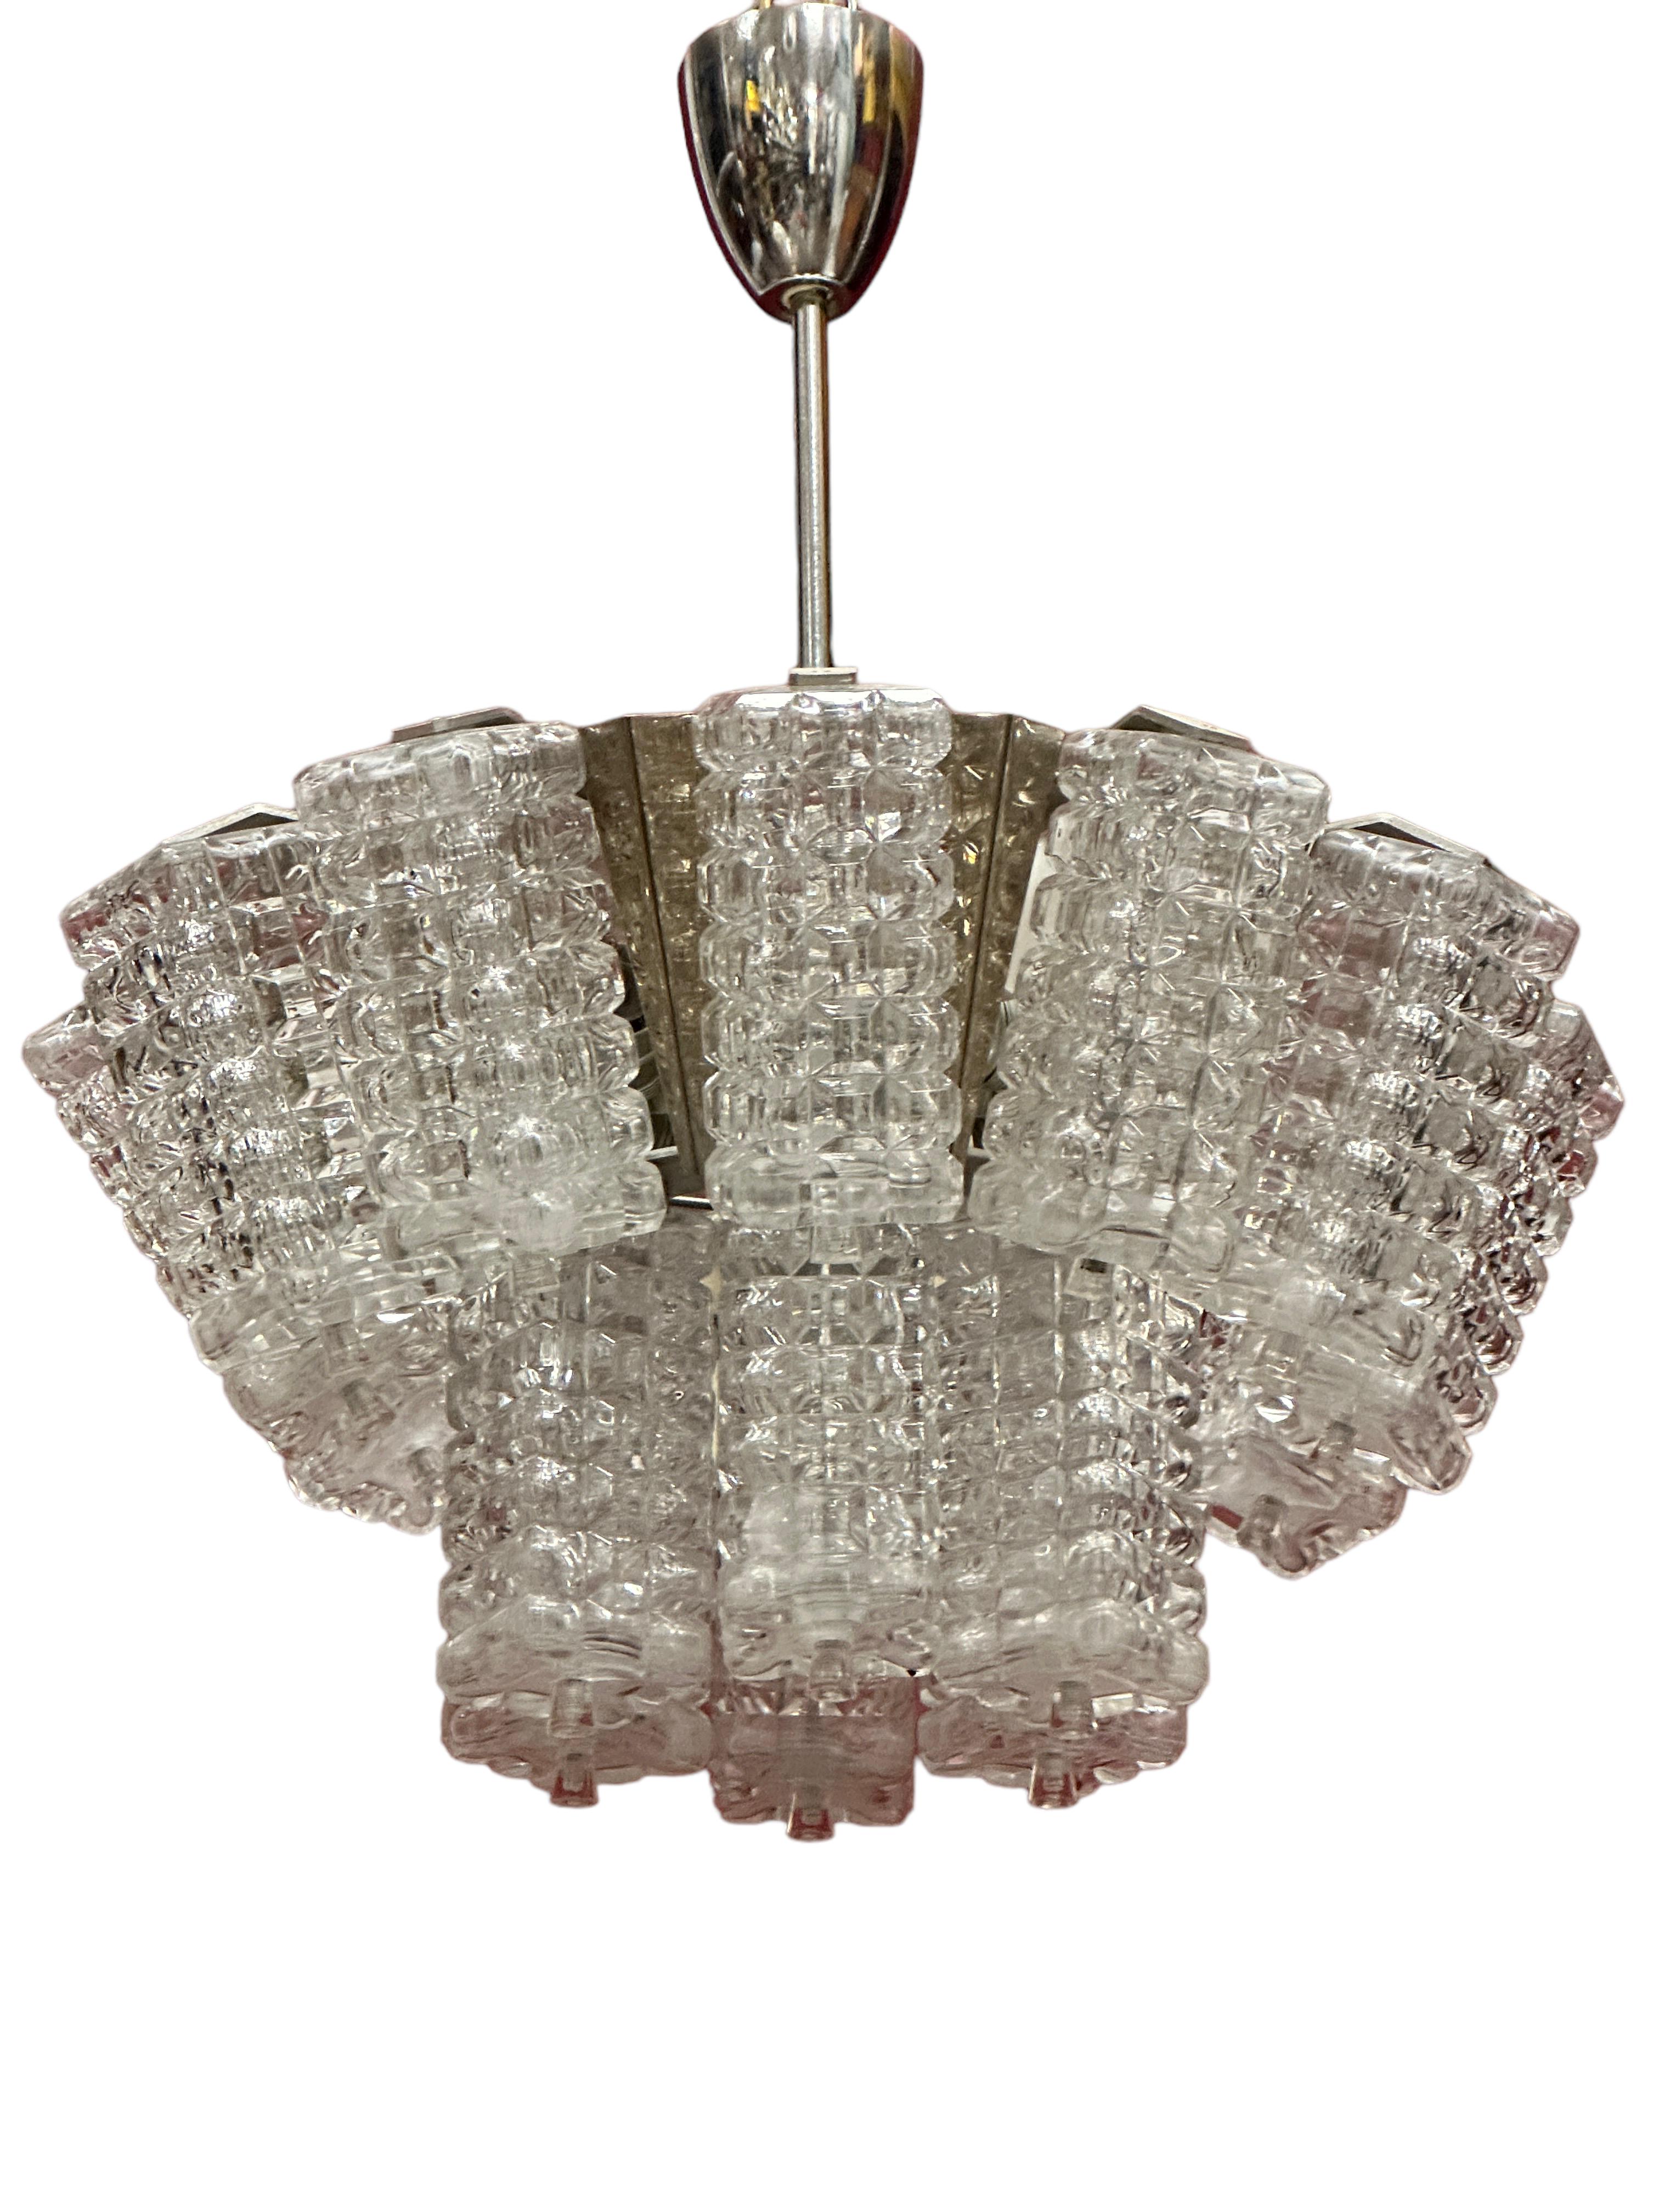 Pair of Two Tiered Glass Cube Chandelier by Austrolux, Austria, 1960s For Sale 3